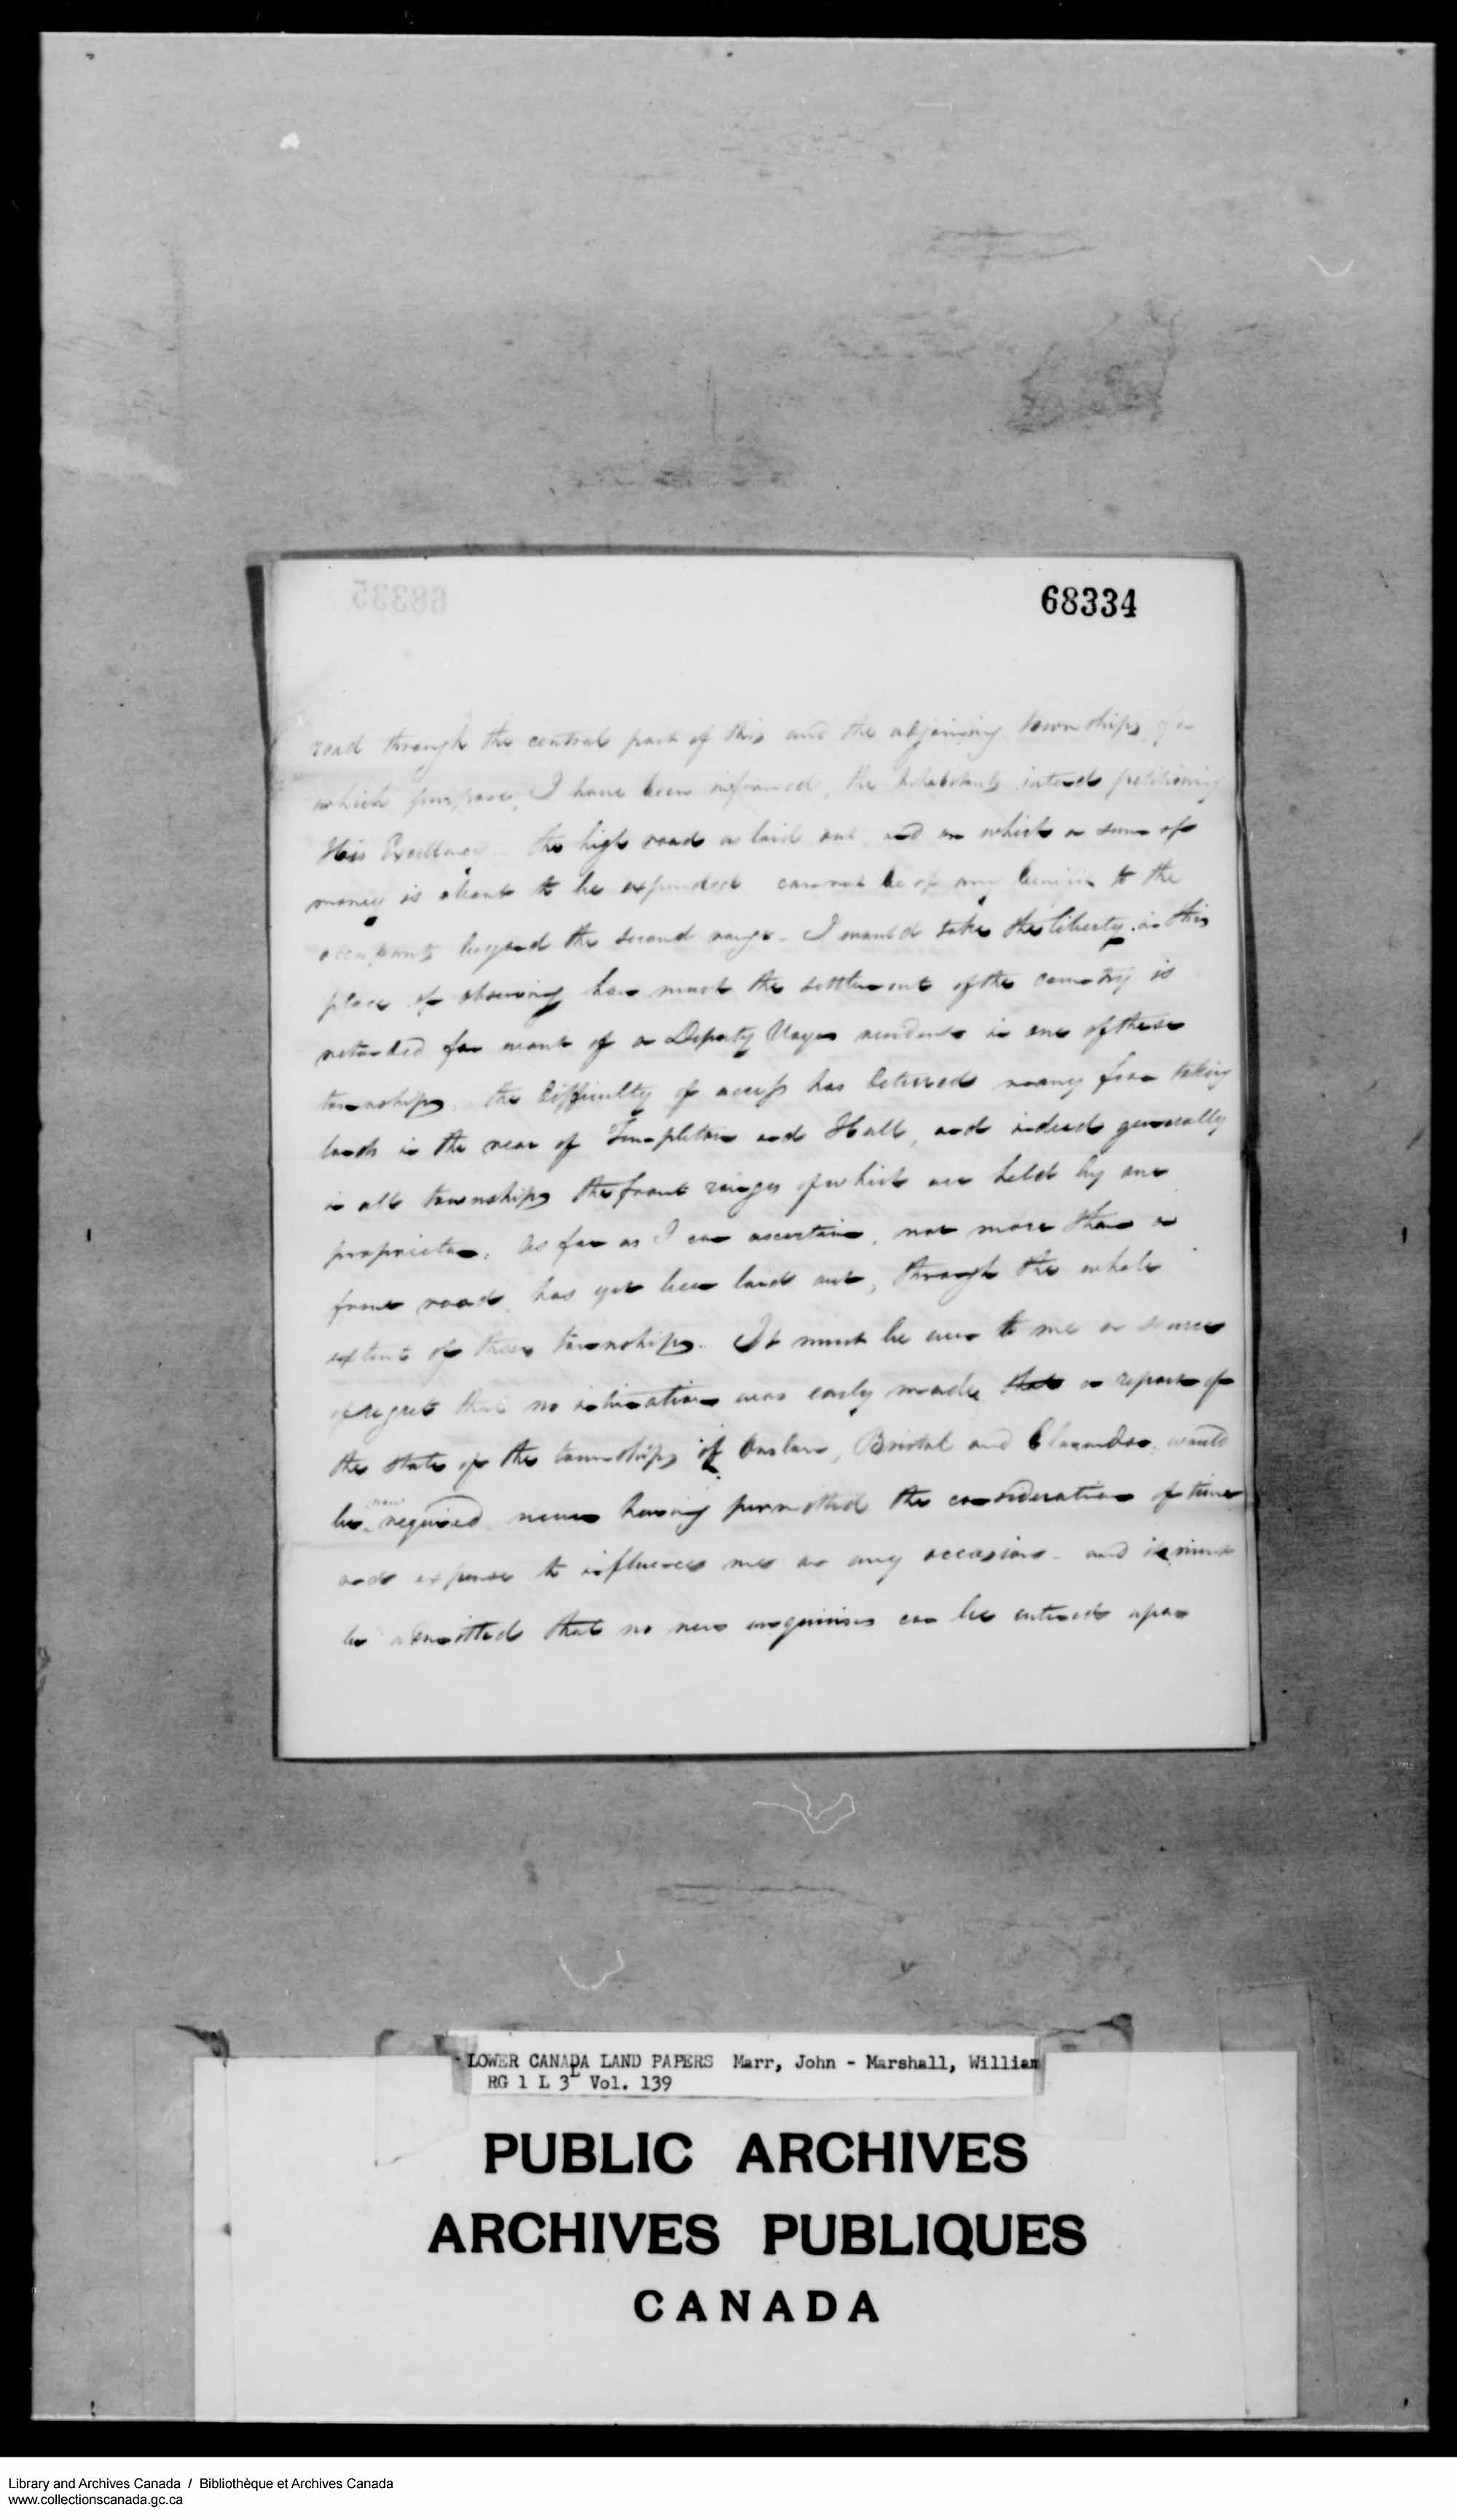 Digitized page of  for Image No.: e008713590